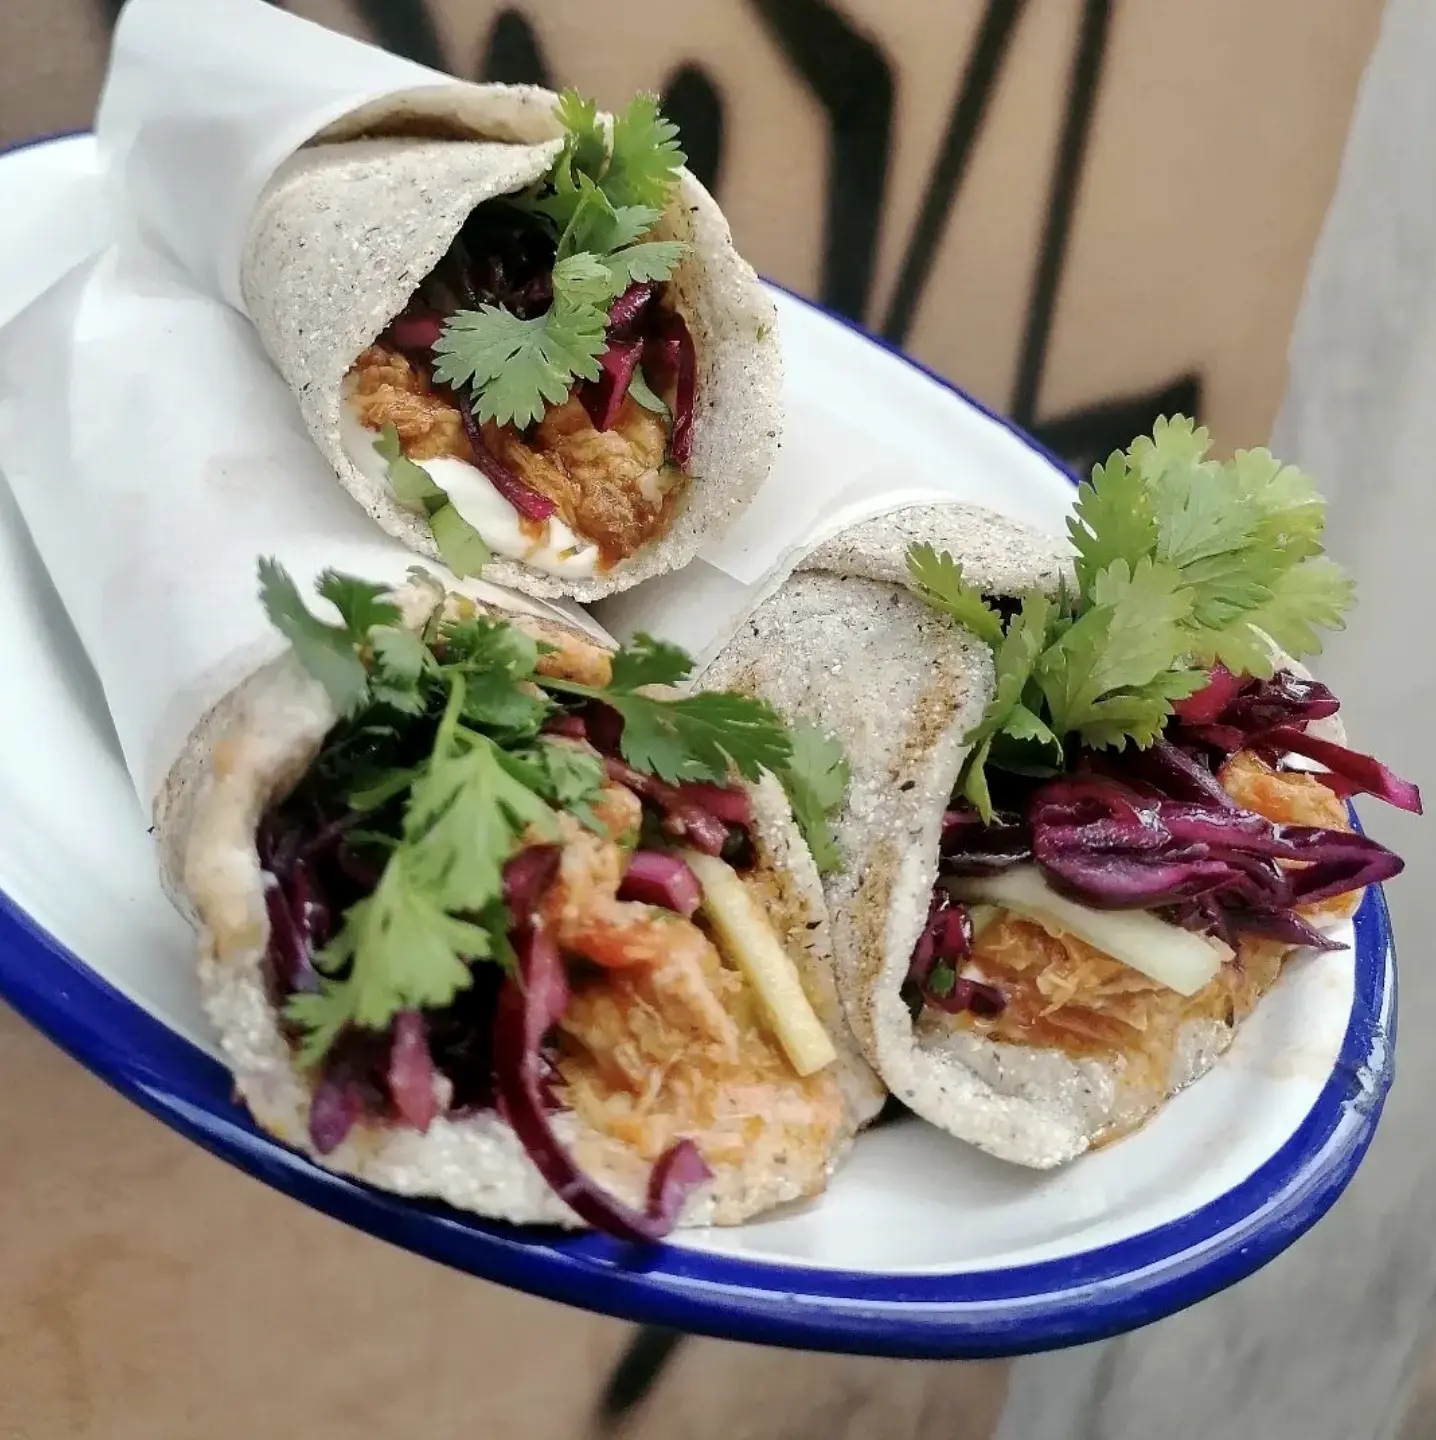 Gluten-free wrap from Pandali in Rome, Italy